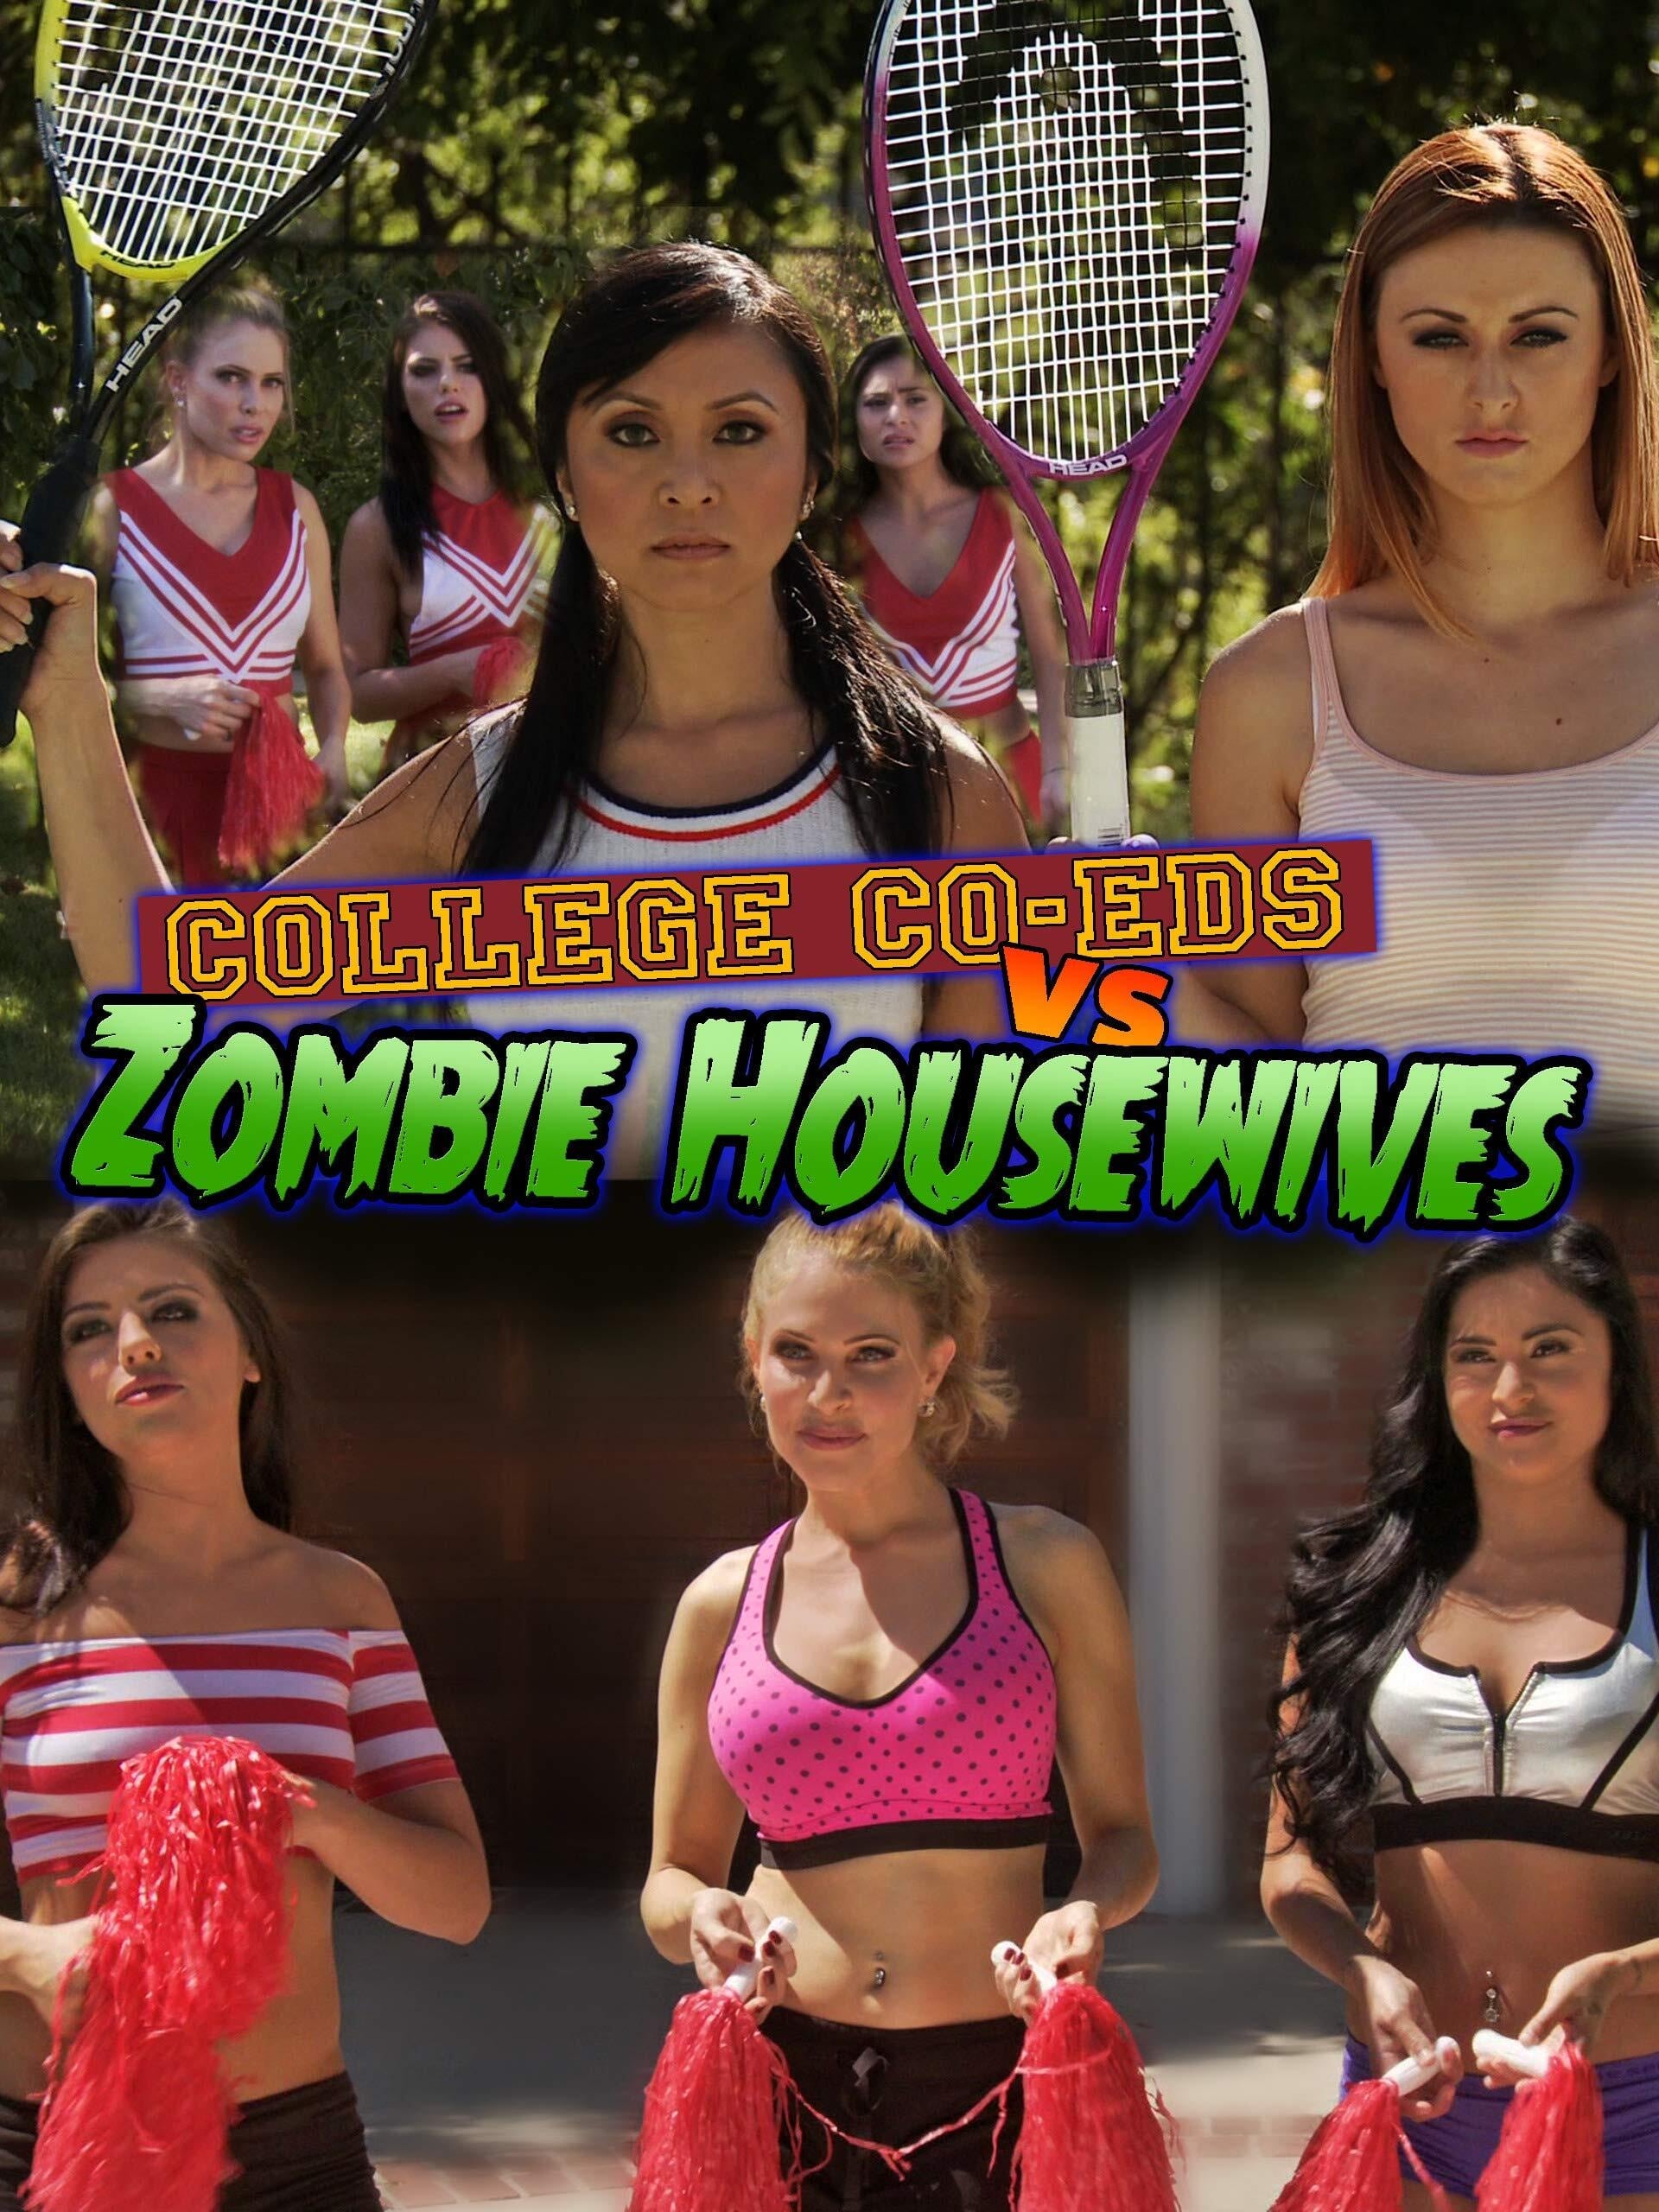 College Coeds Vs Zombie Housewives Pel Cula Donde Ver